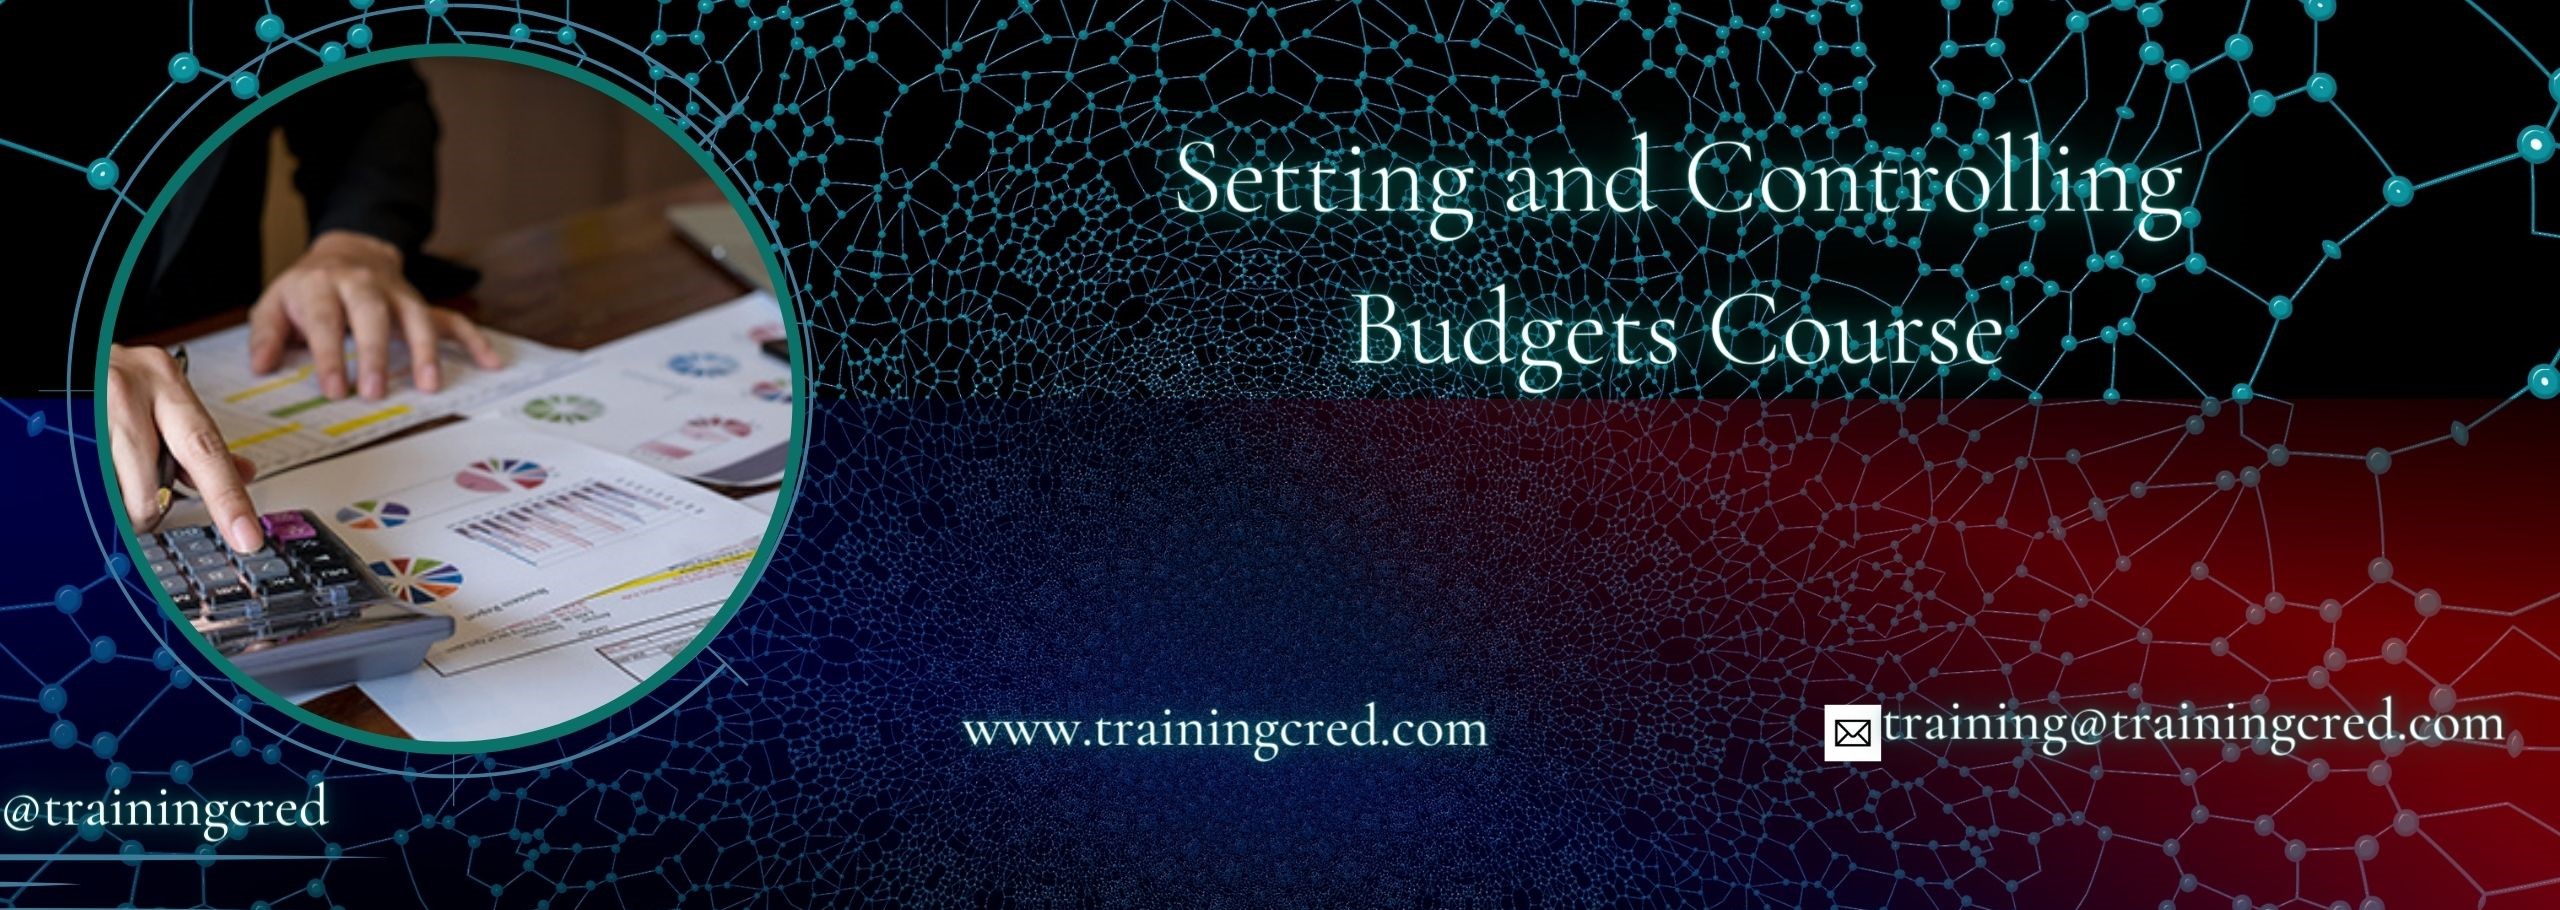 Setting and Controlling Budgets Training